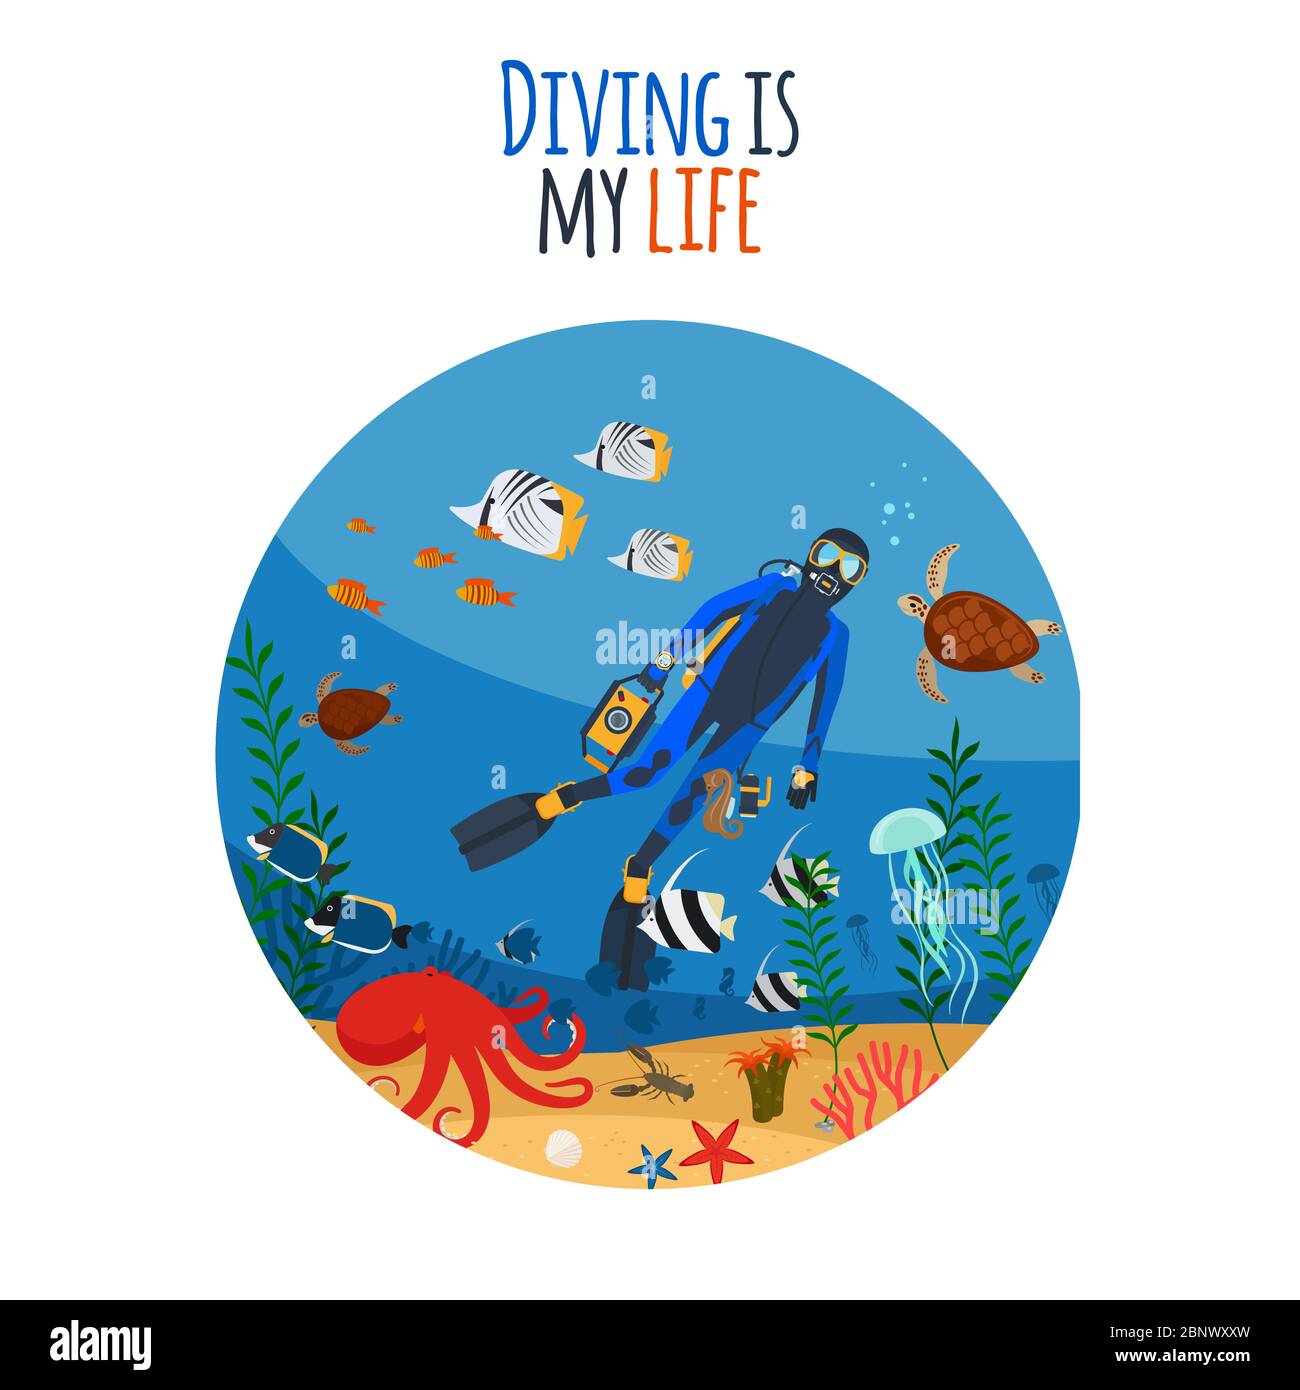 Diving is my life illustration. Diver underwater circle isolated icon. Vector illustration Stock Vector